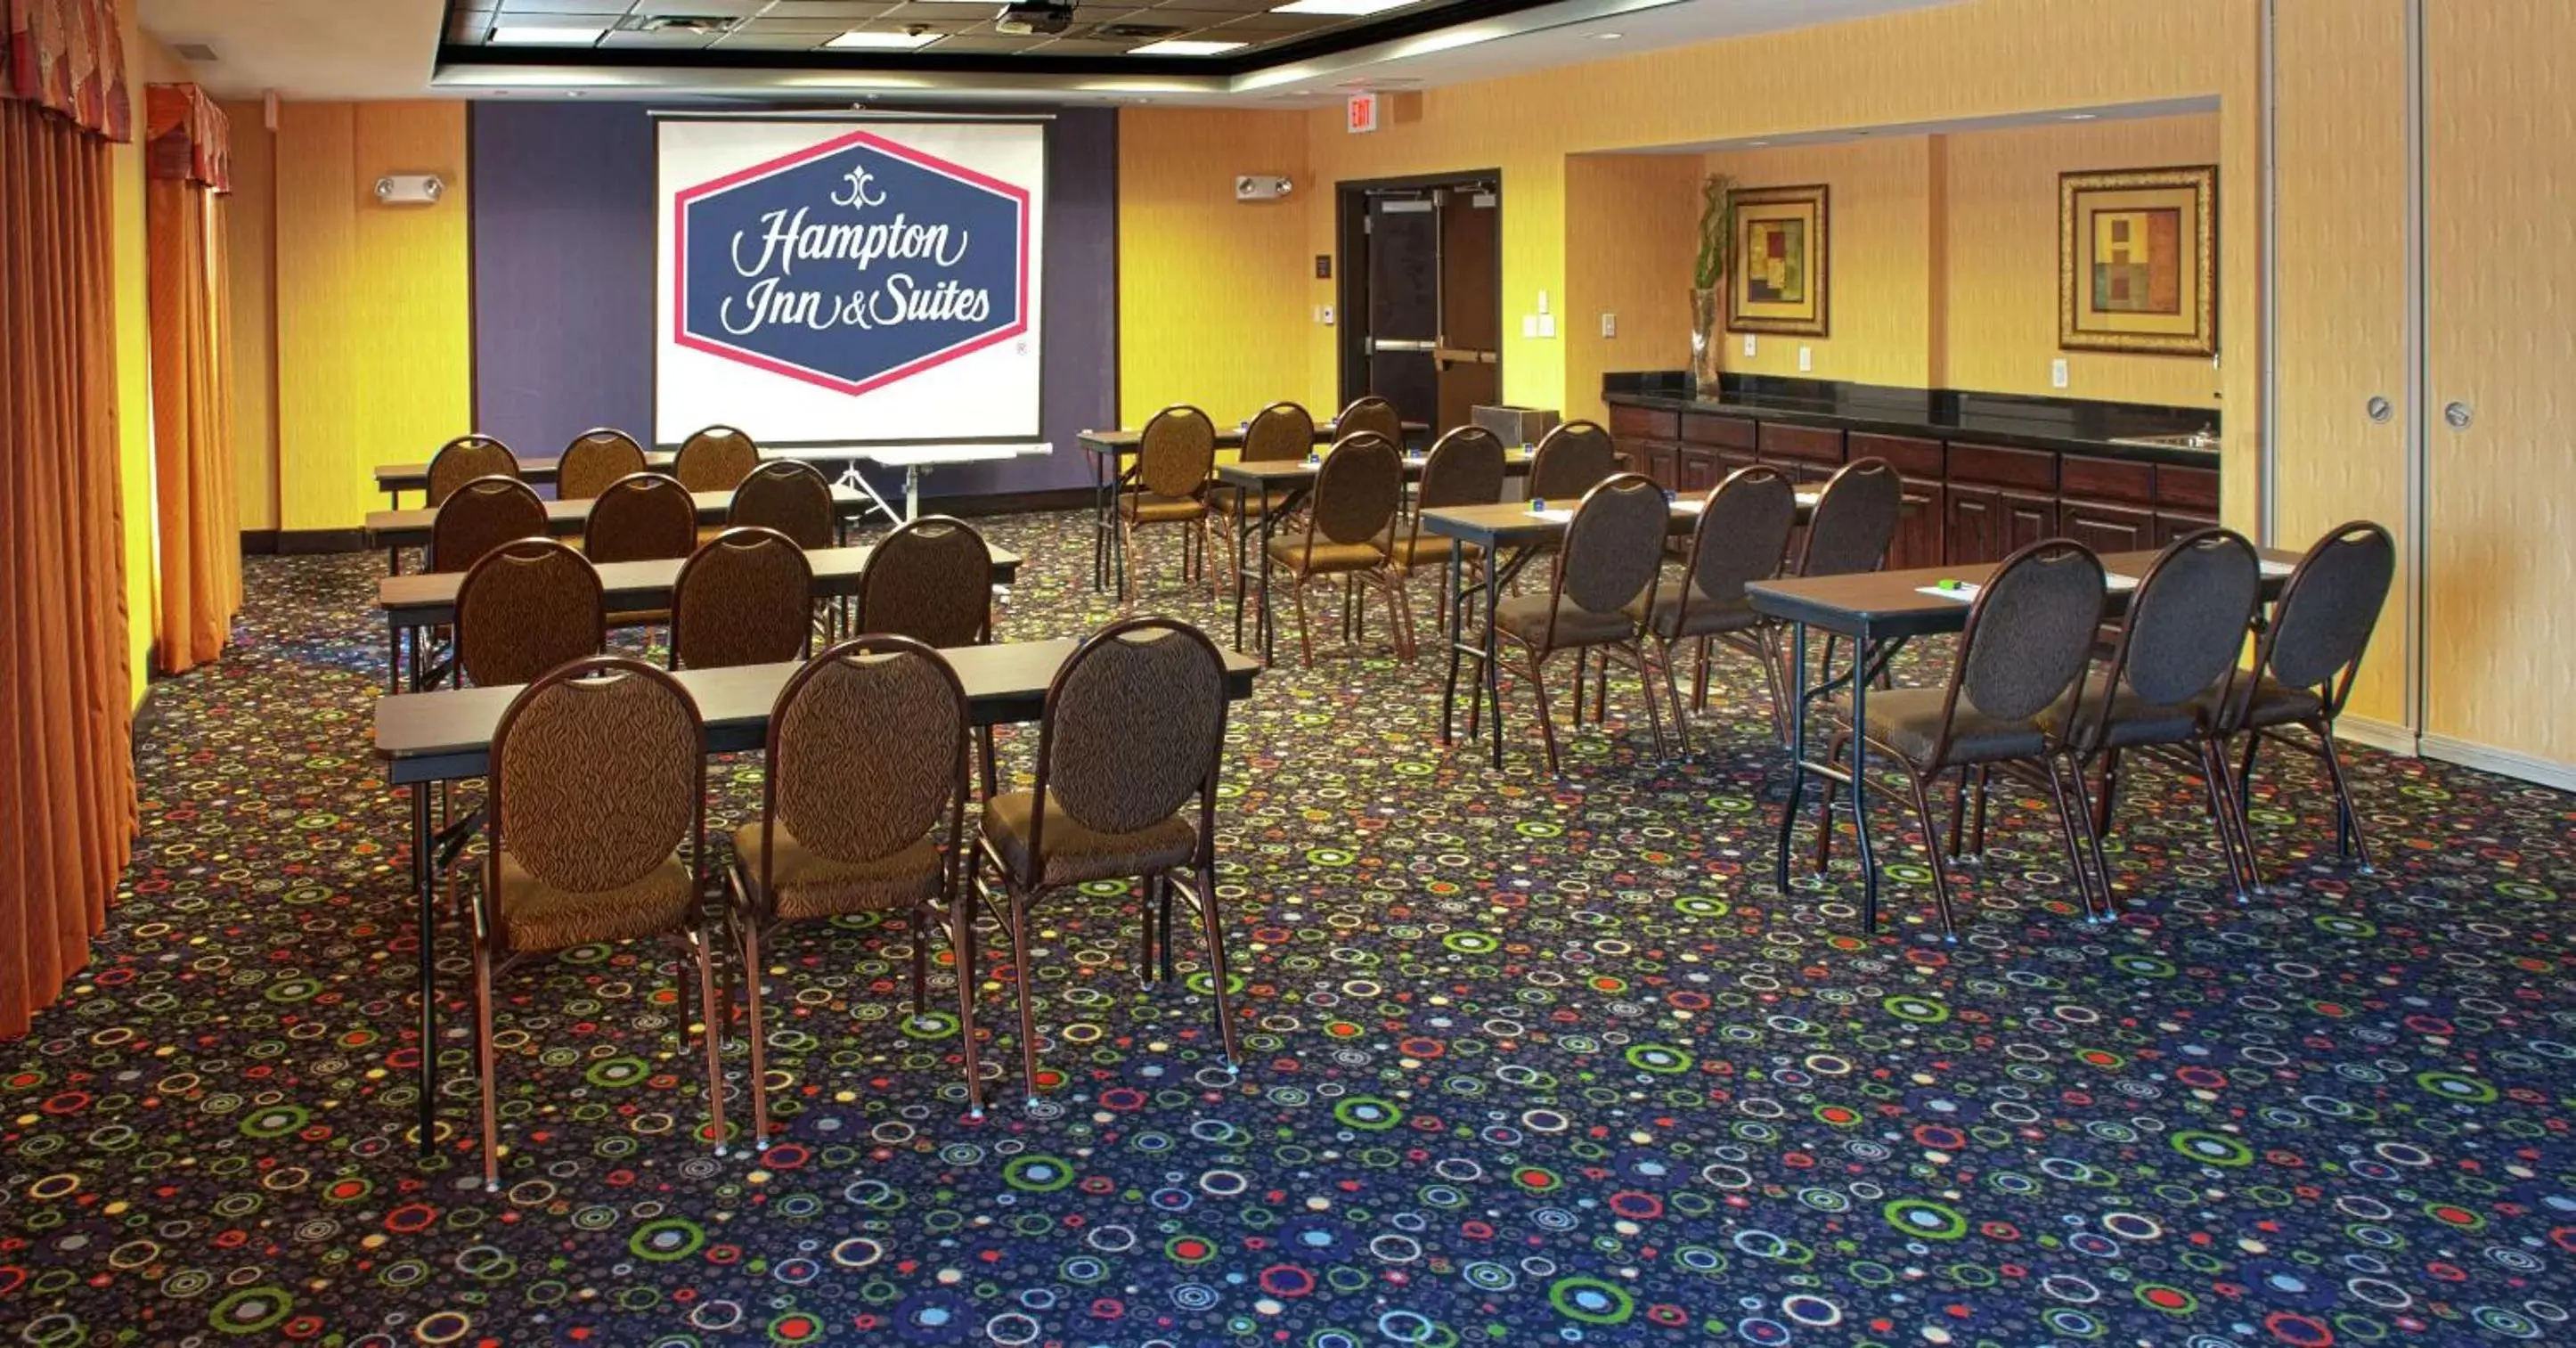 Meeting/conference room in Hampton Inn and Suites Dallas/Lewisville-Vista Ridge Mall